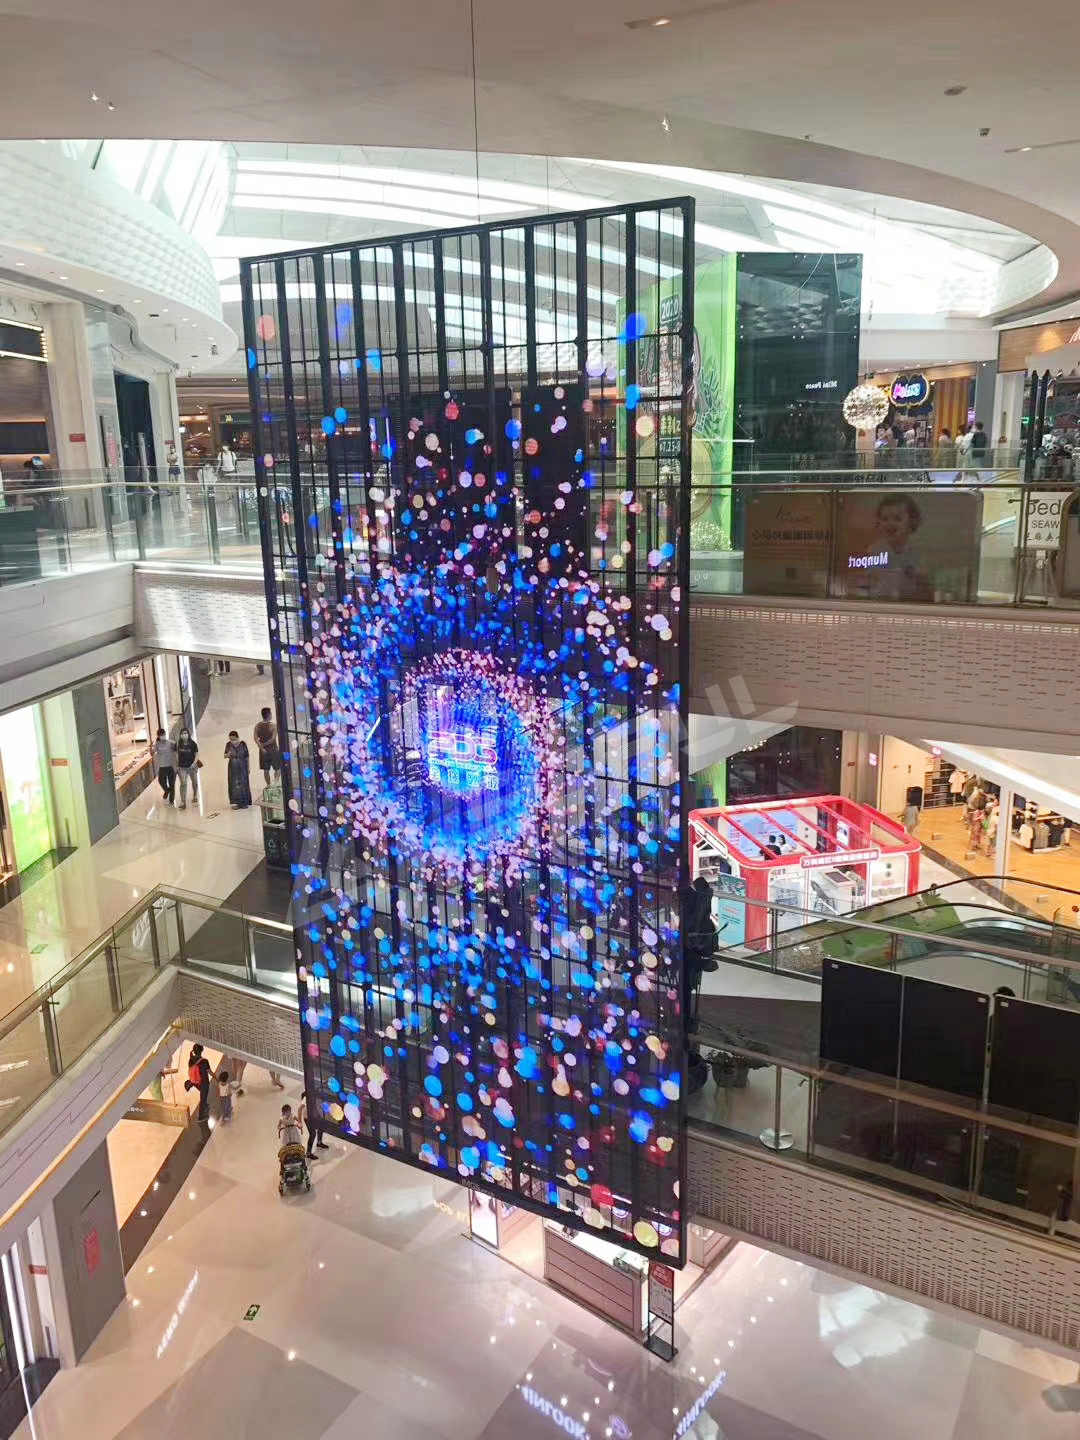 Development Trend of Outdoor Transparent LED Display Technology